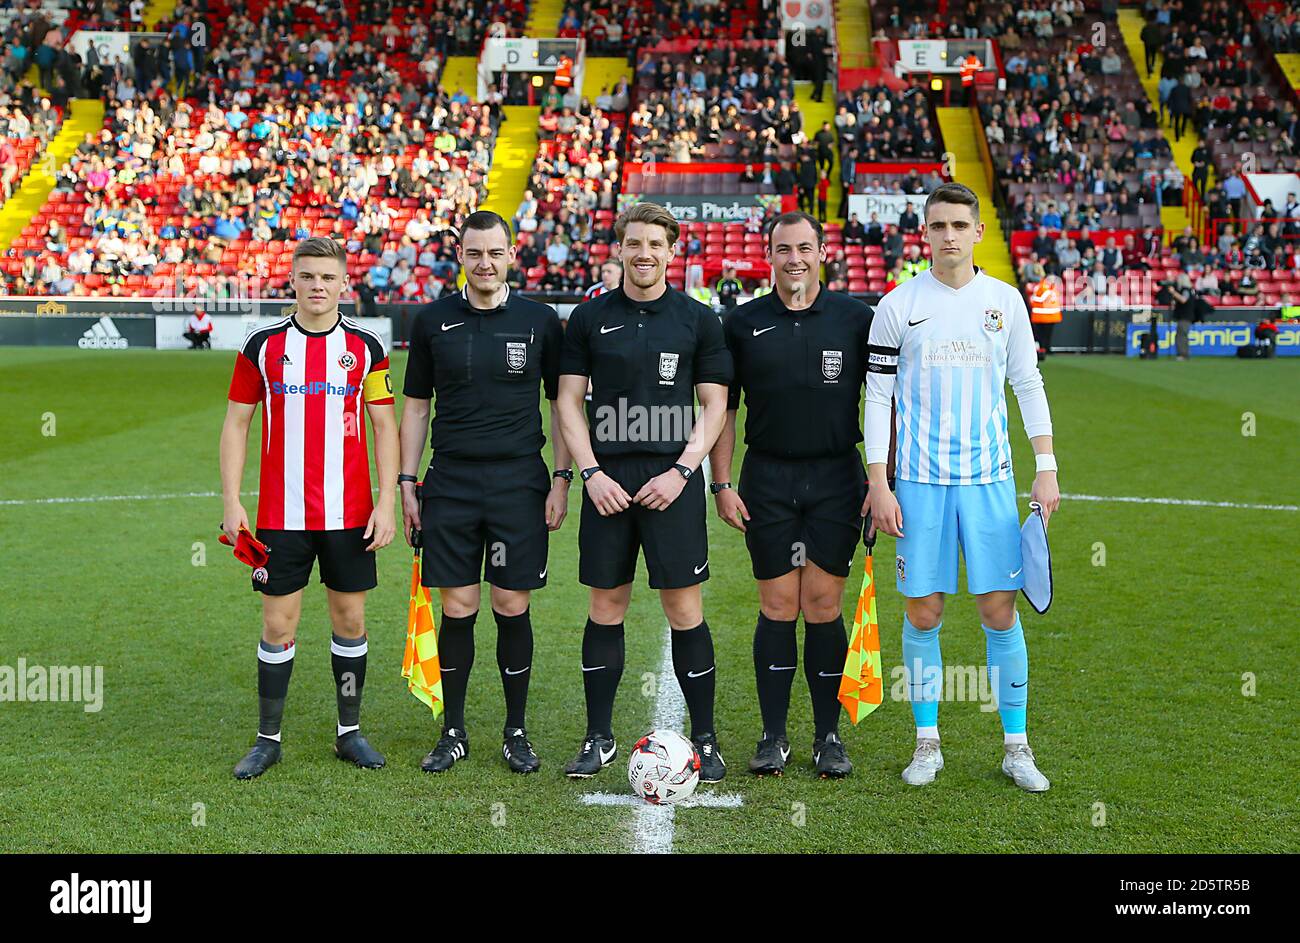 Sheffield United captain Regan Slater (left) and Coventry City captain Tom Bayliss (right) pose for a photograph with officials Sam Mulhall, Jack Forder and Benjamin Stott  Stock Photo